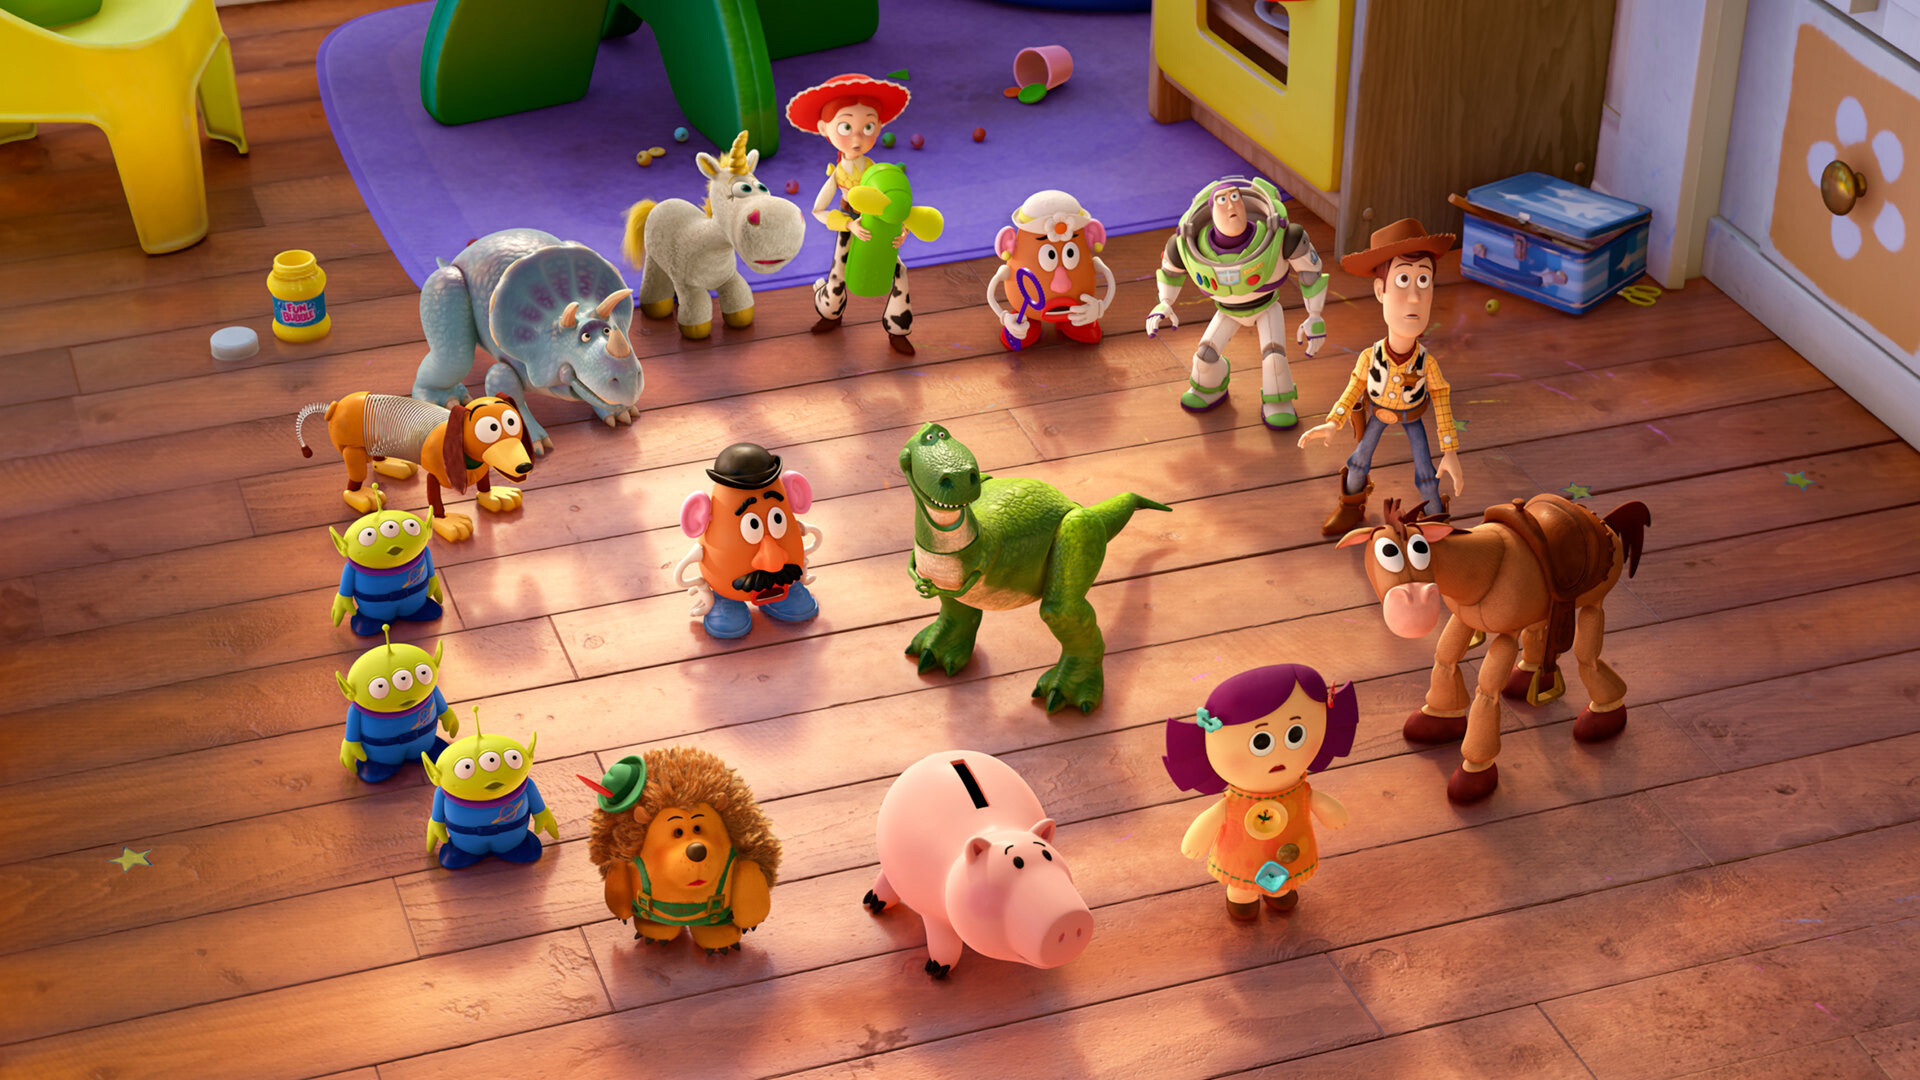 Toy Story: The highest-grossing film of 2010, Walt Disney Pictures. 1920x1080 Full HD Wallpaper.